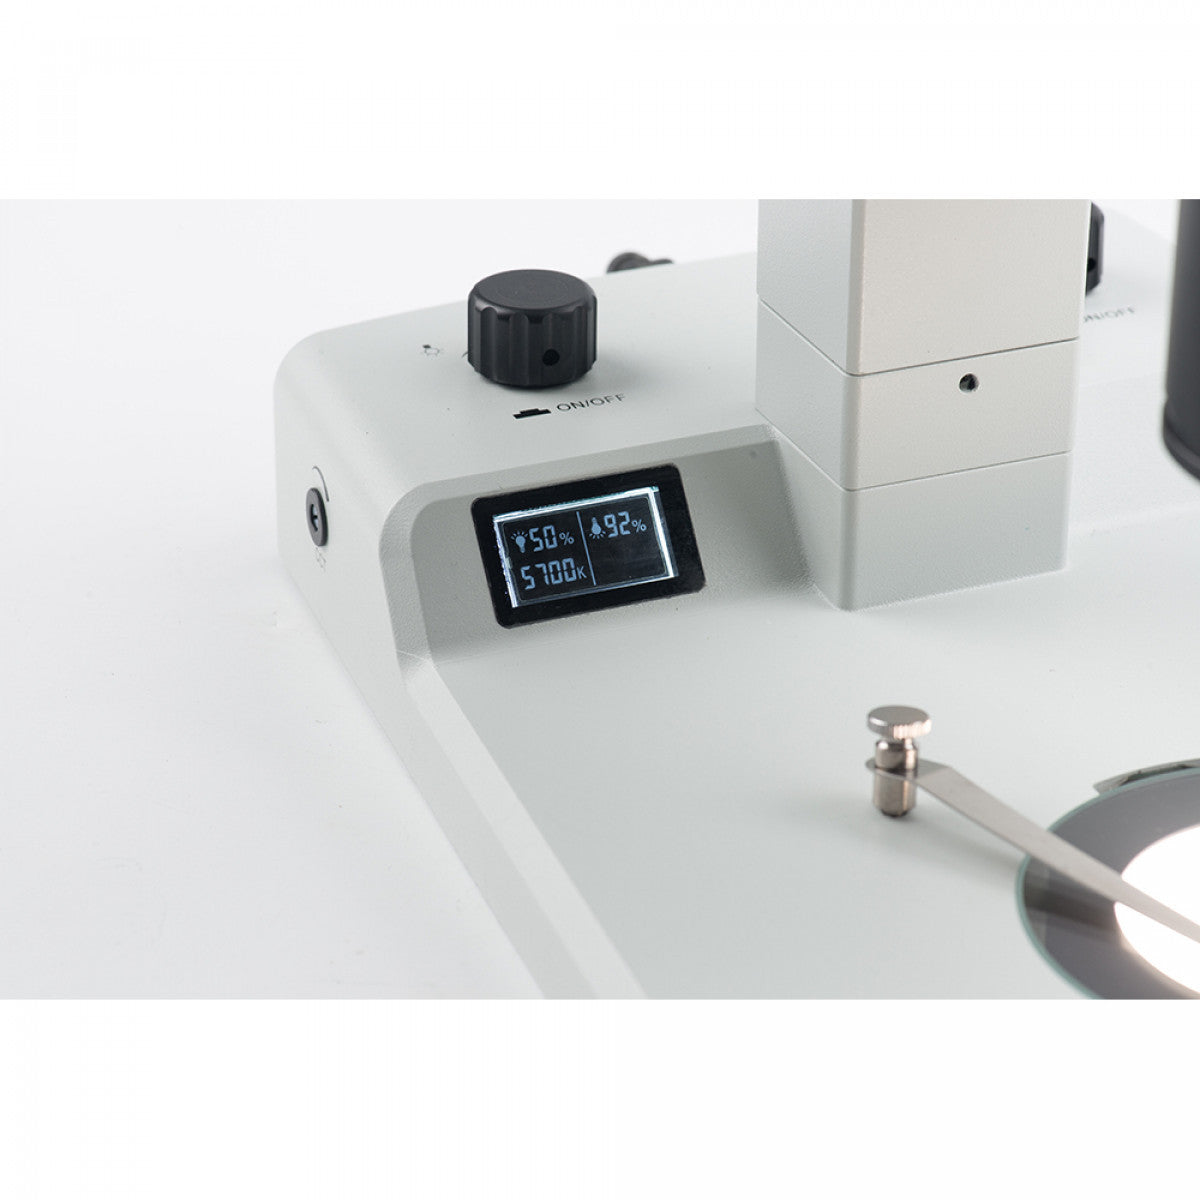 Accu-Scope LED Stereoscope Stand with focus mount - microscopemarketplace